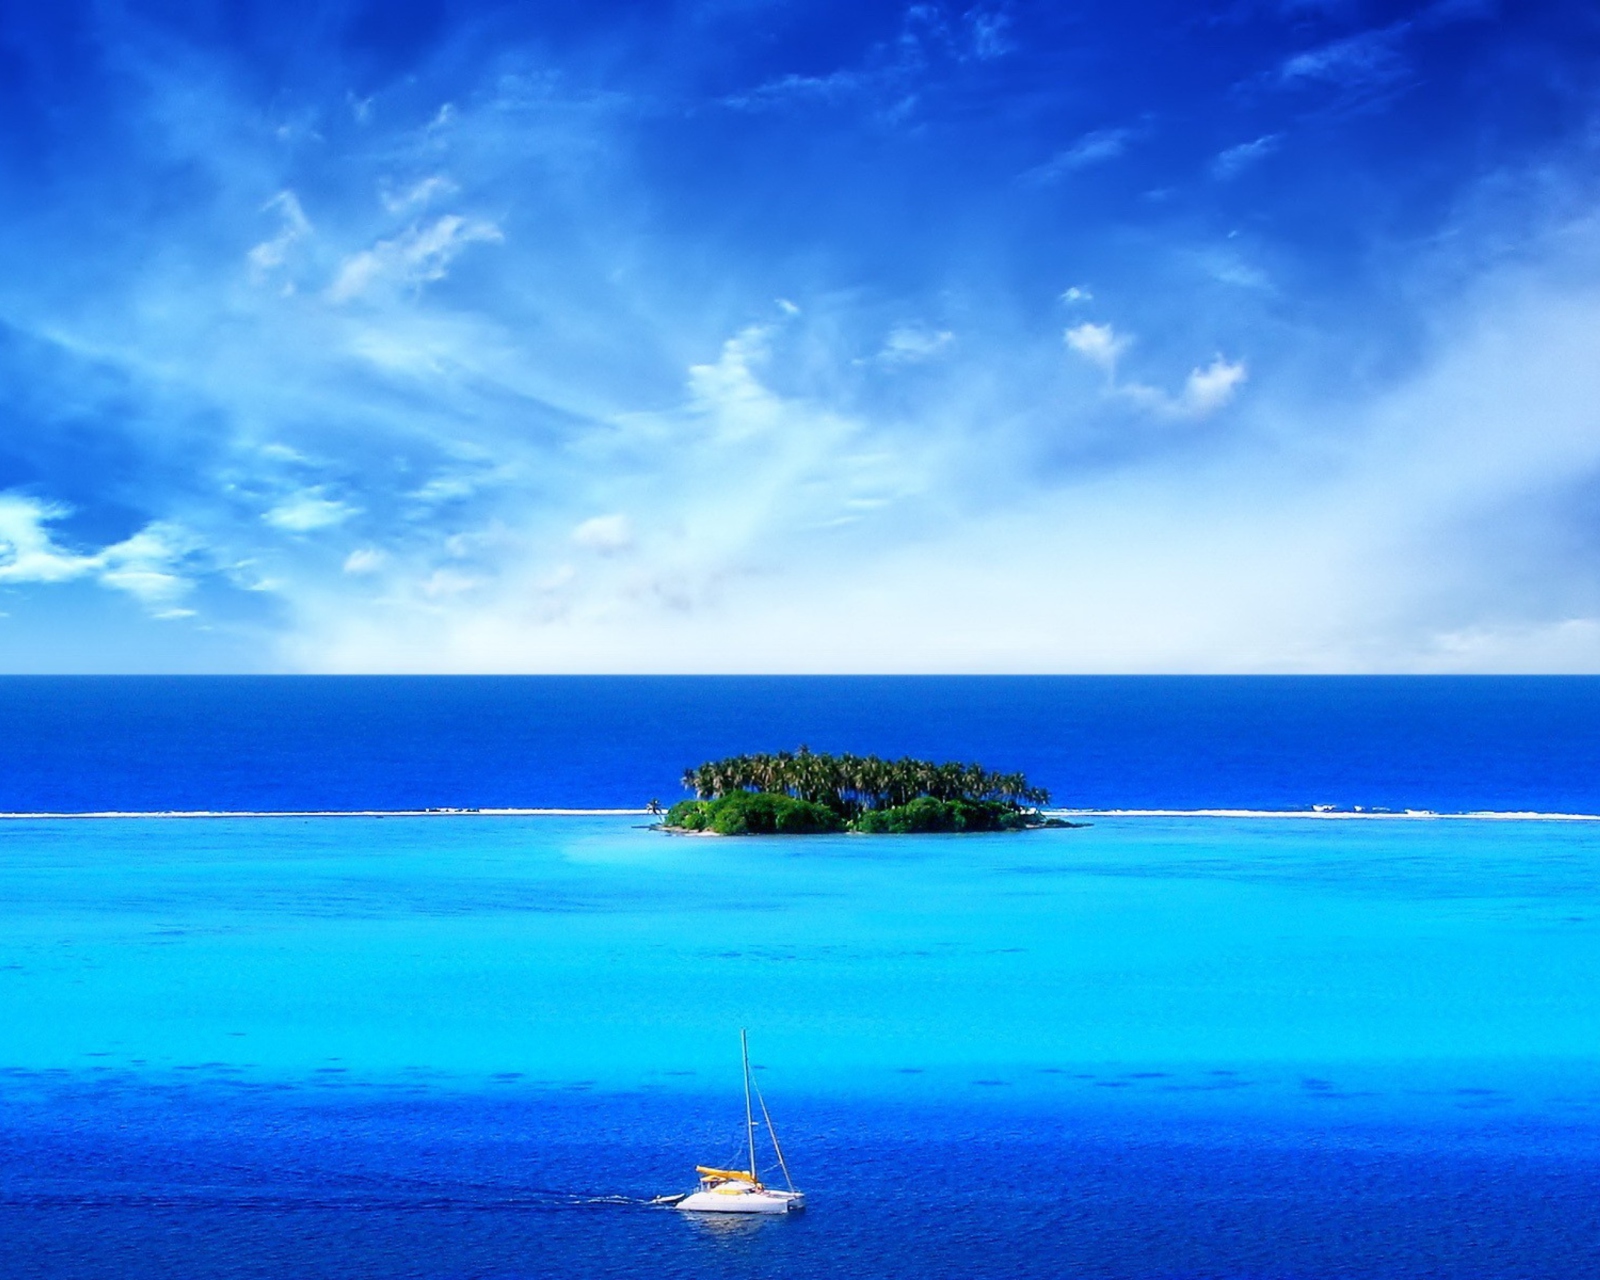 Green Island In Middle Of Blue Ocean And White Boat wallpaper 1600x1280